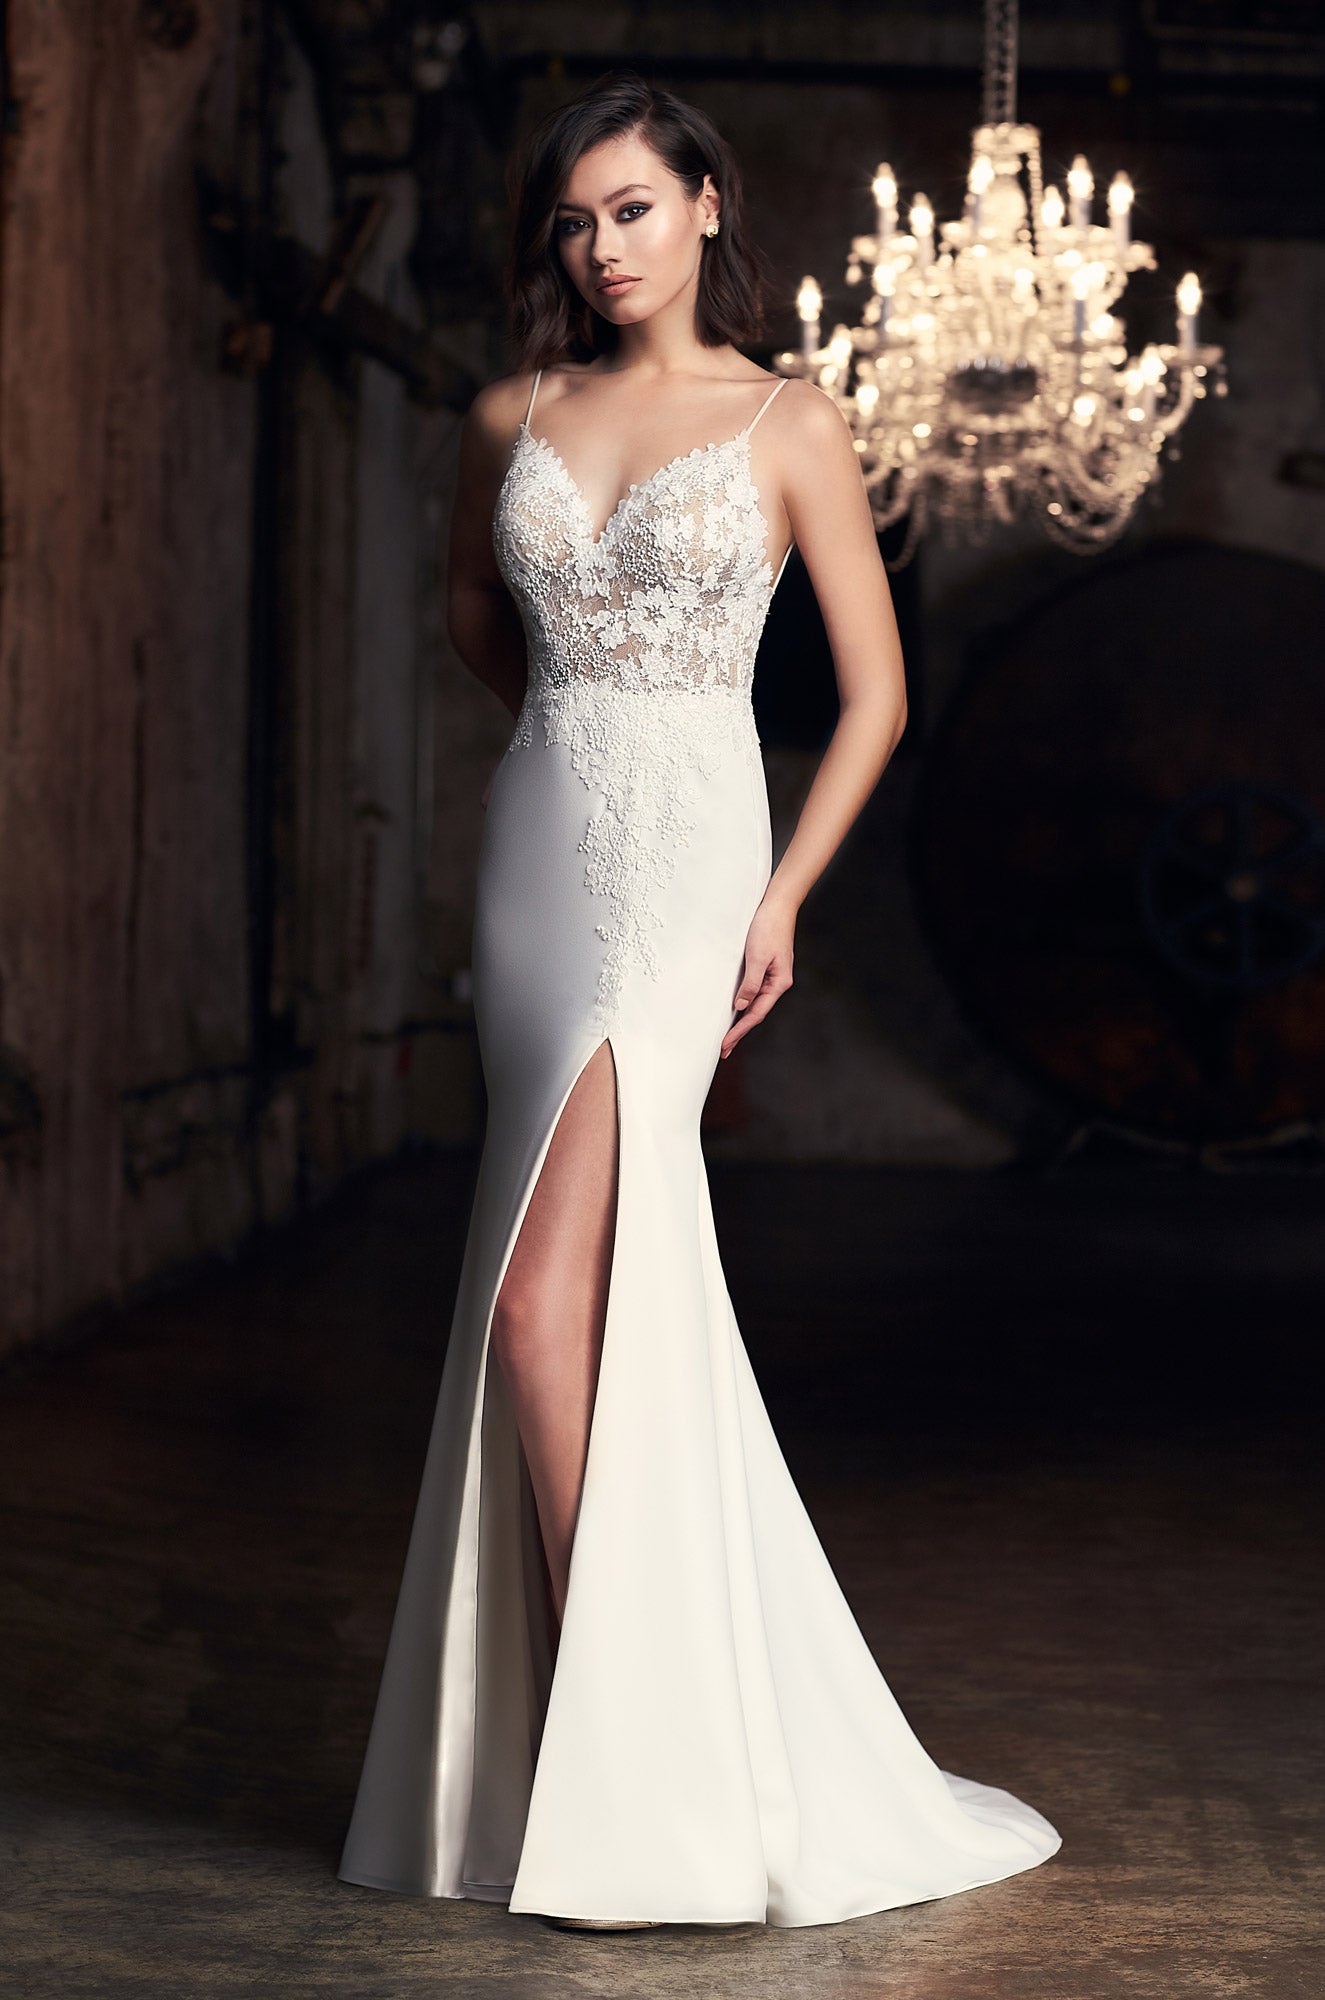 Great Slit Wedding Dress Check it out now | peplumdresses3